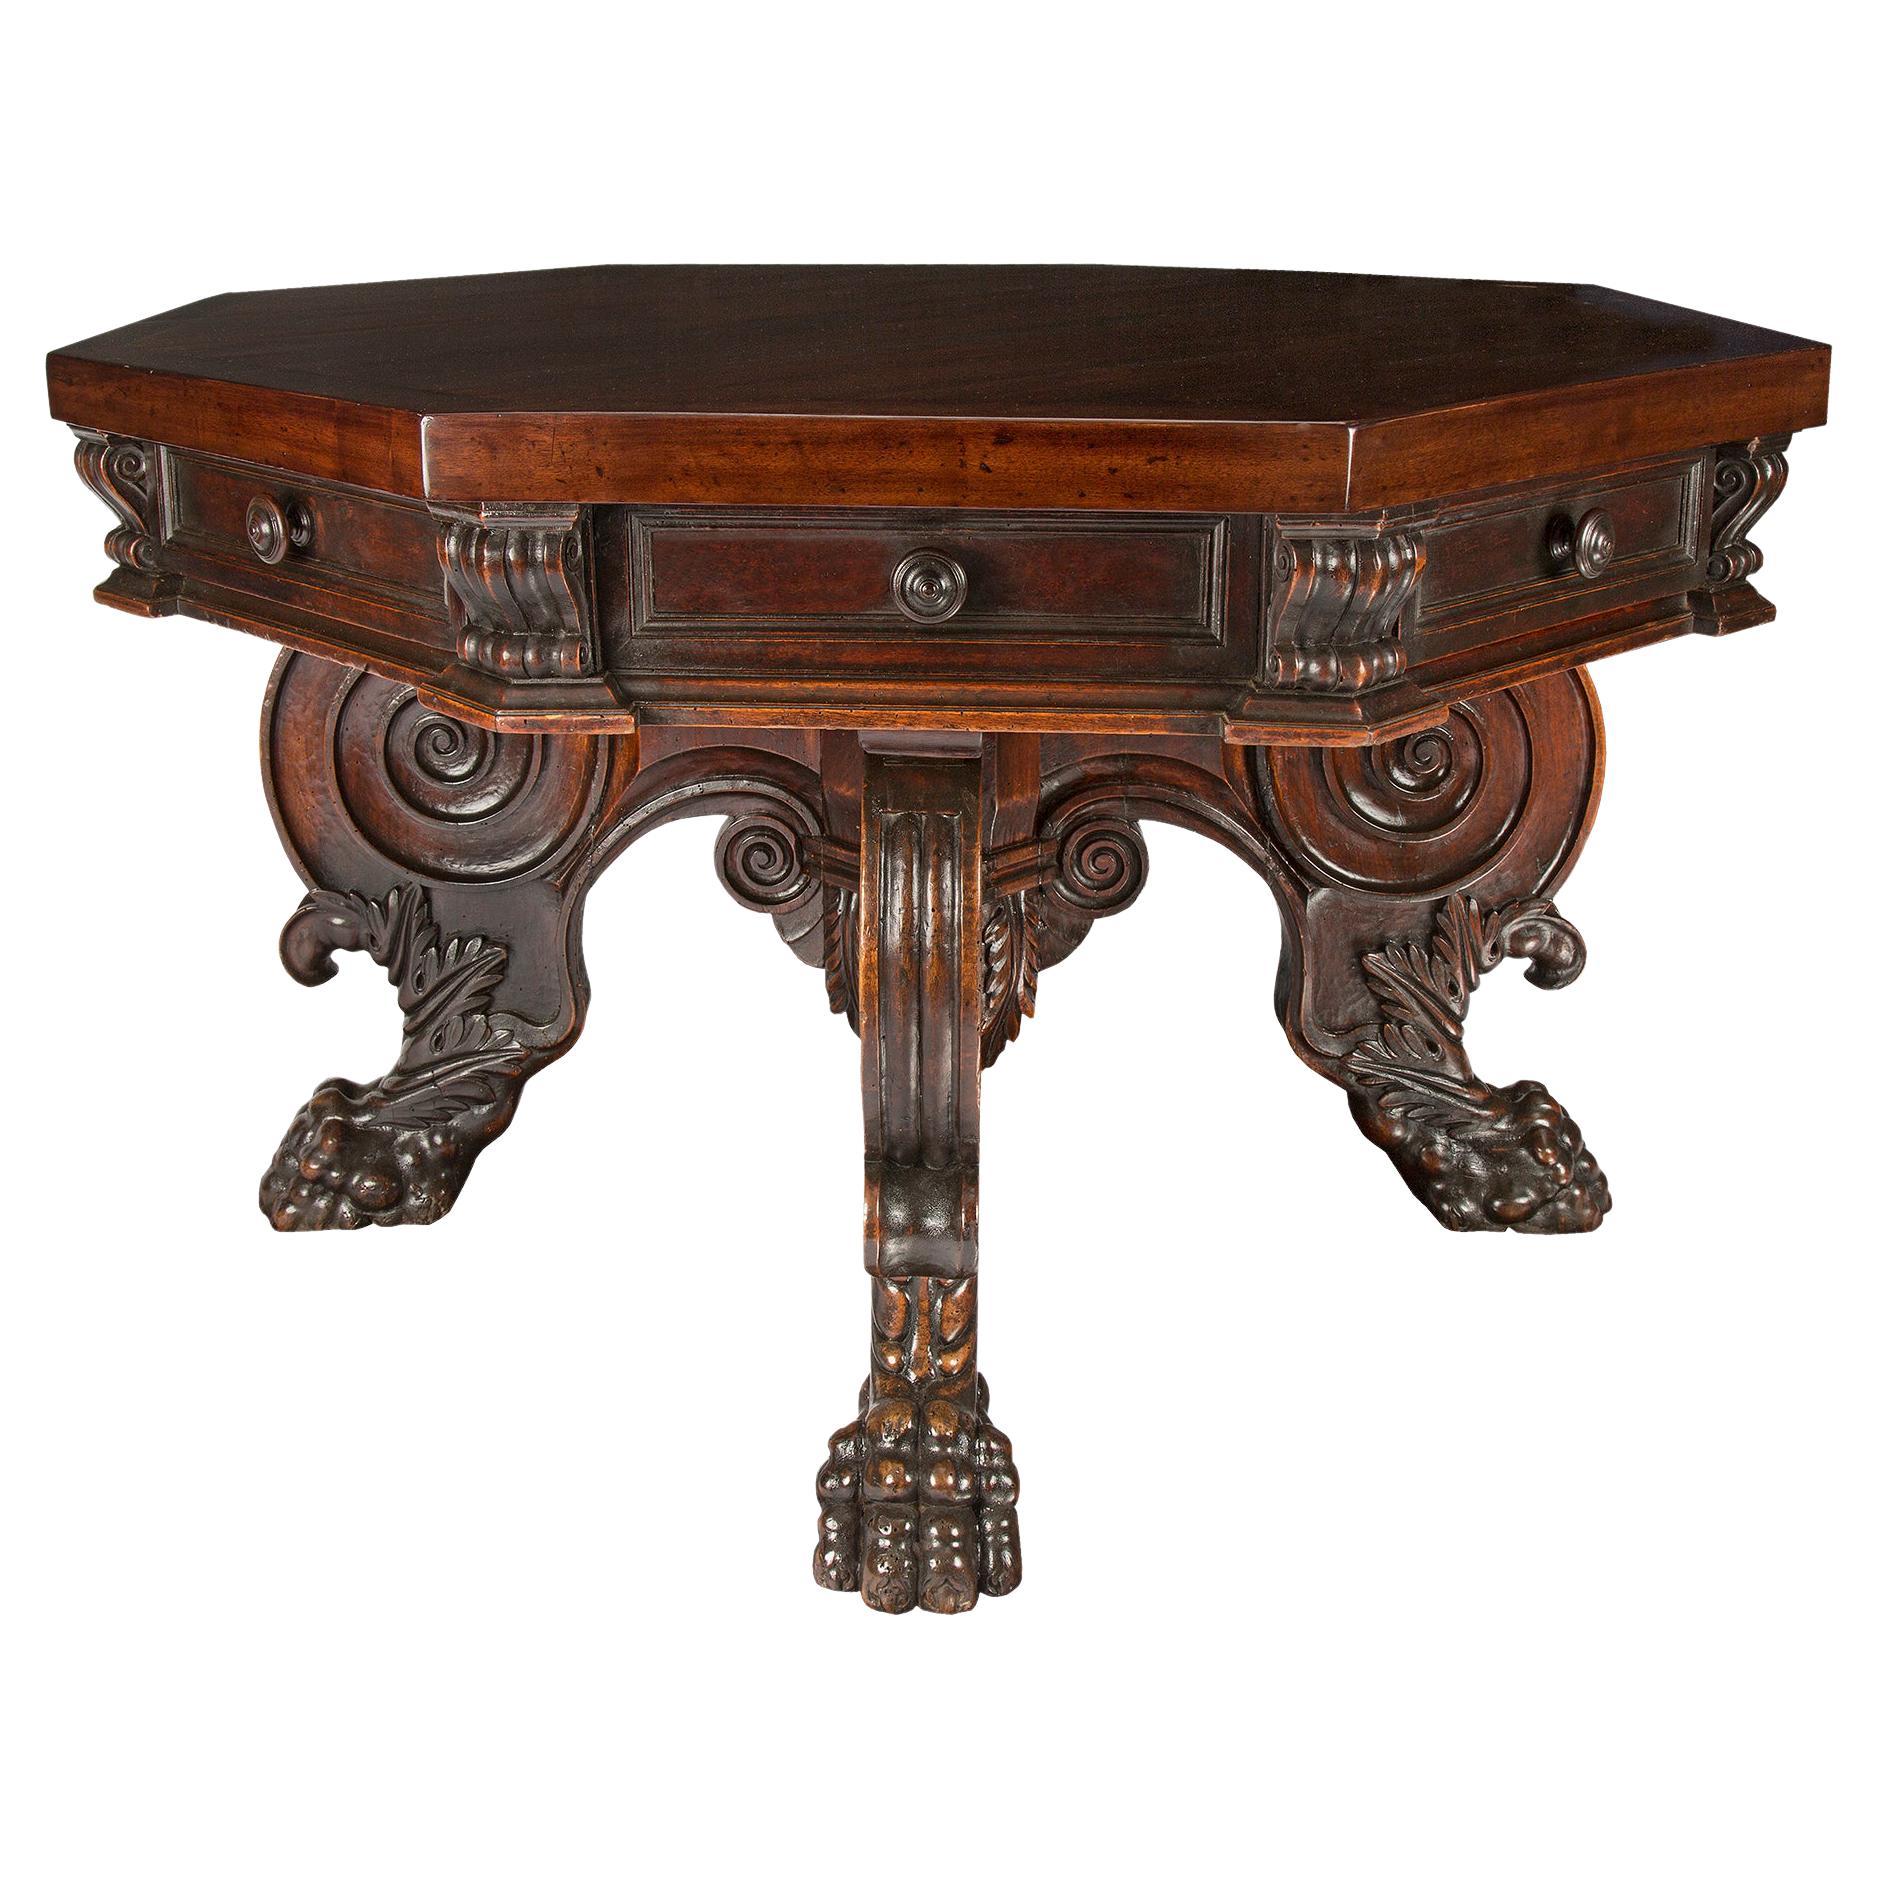 Italian 17th Century Baroque Period Solid Walnut Octagonal Center Table For Sale